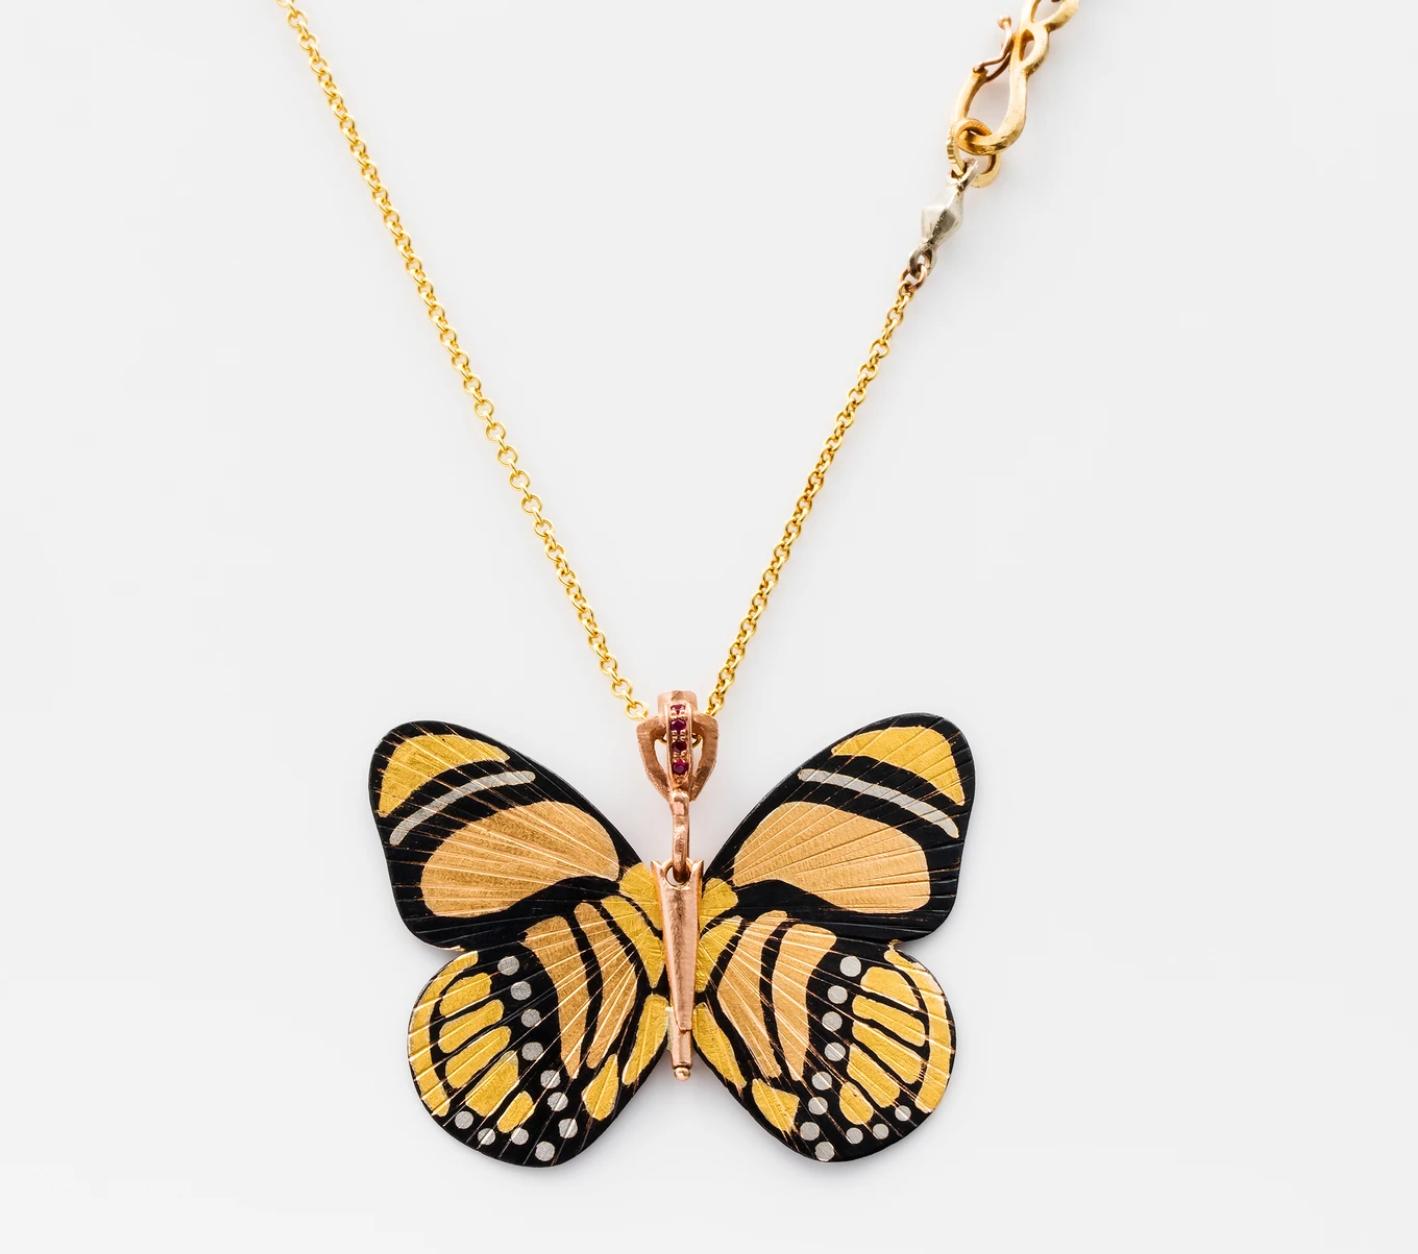 James Banks's signature butterfly necklace features a Large Callicore Butterfly with a hinge at the center to allow movement of the wings, set in 18k Rose Gold, 18k Yellow Gold, 18k White Gold, Shakudo, hung on an 18k Yellow Gold Chain with a secure